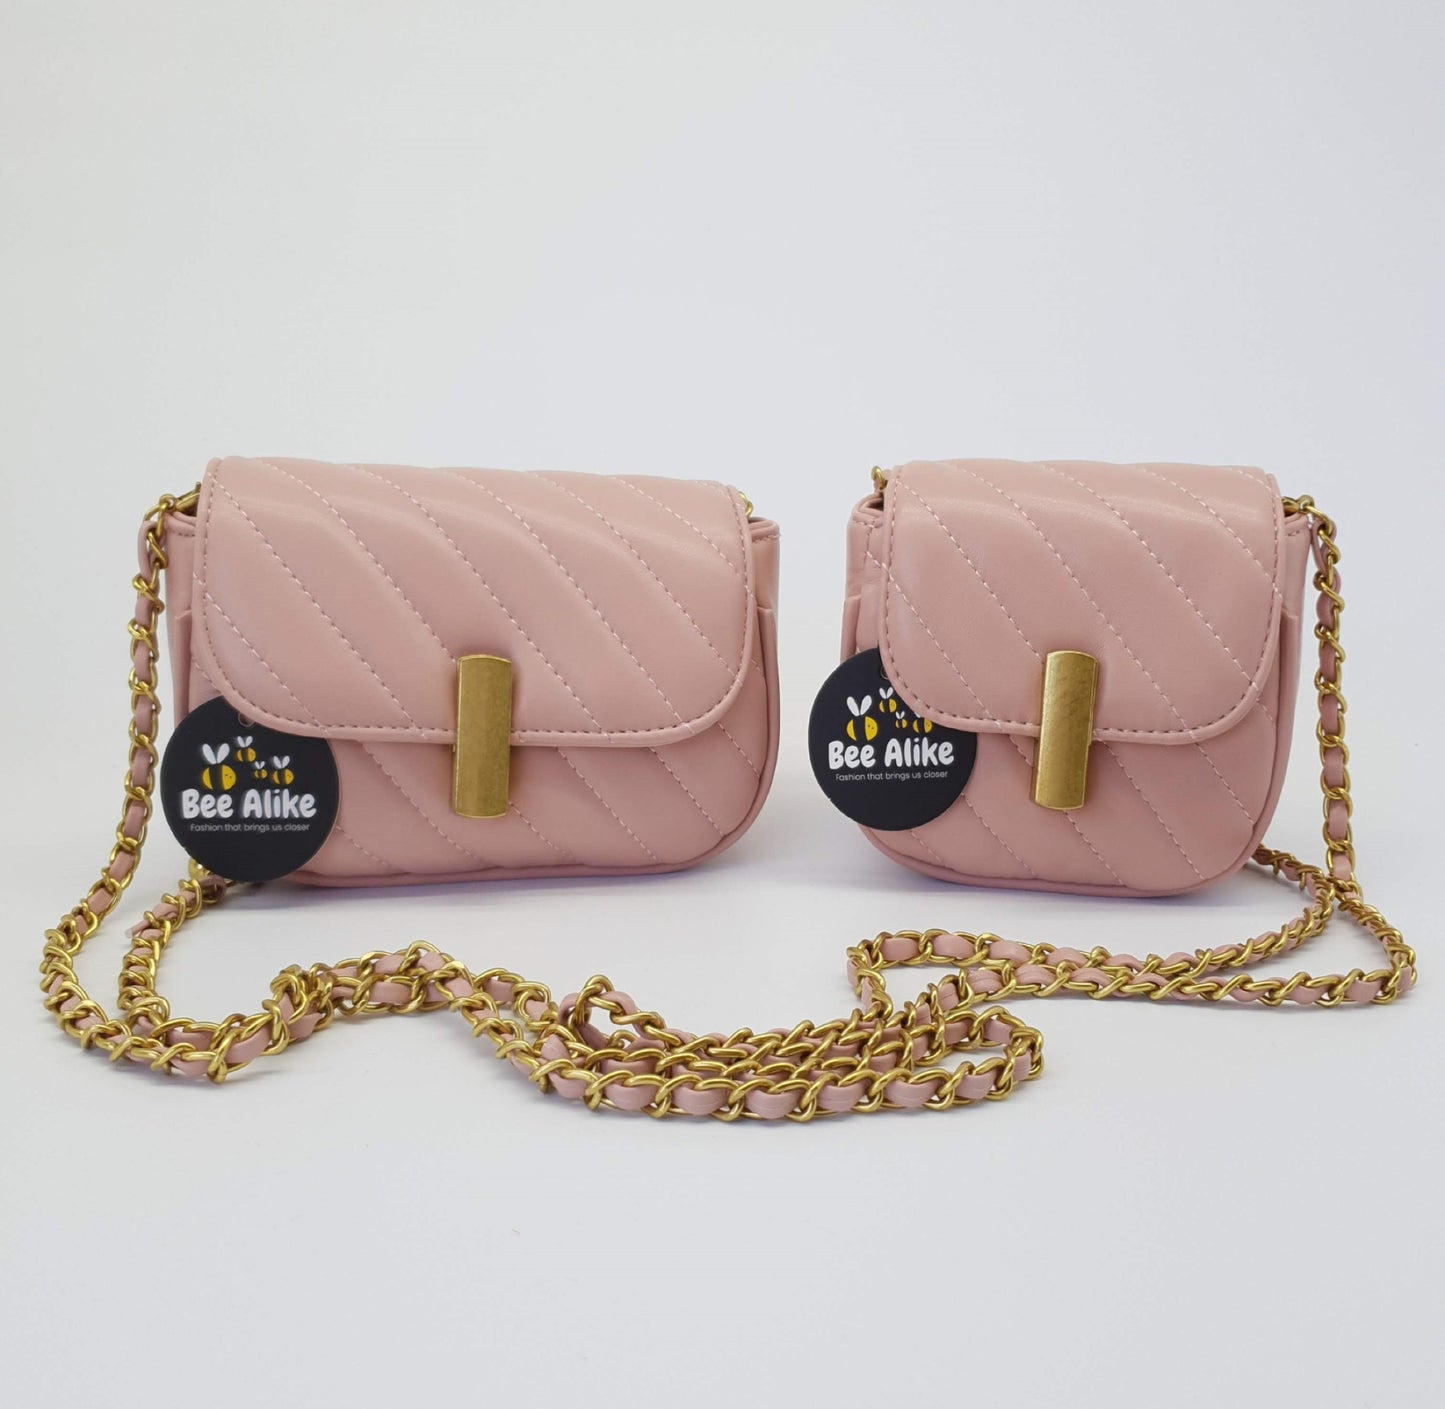 Mother Daughter Matching bags, Mother Daughter bag in pink, gold chain shoulder straps. Mother Daughter bag 